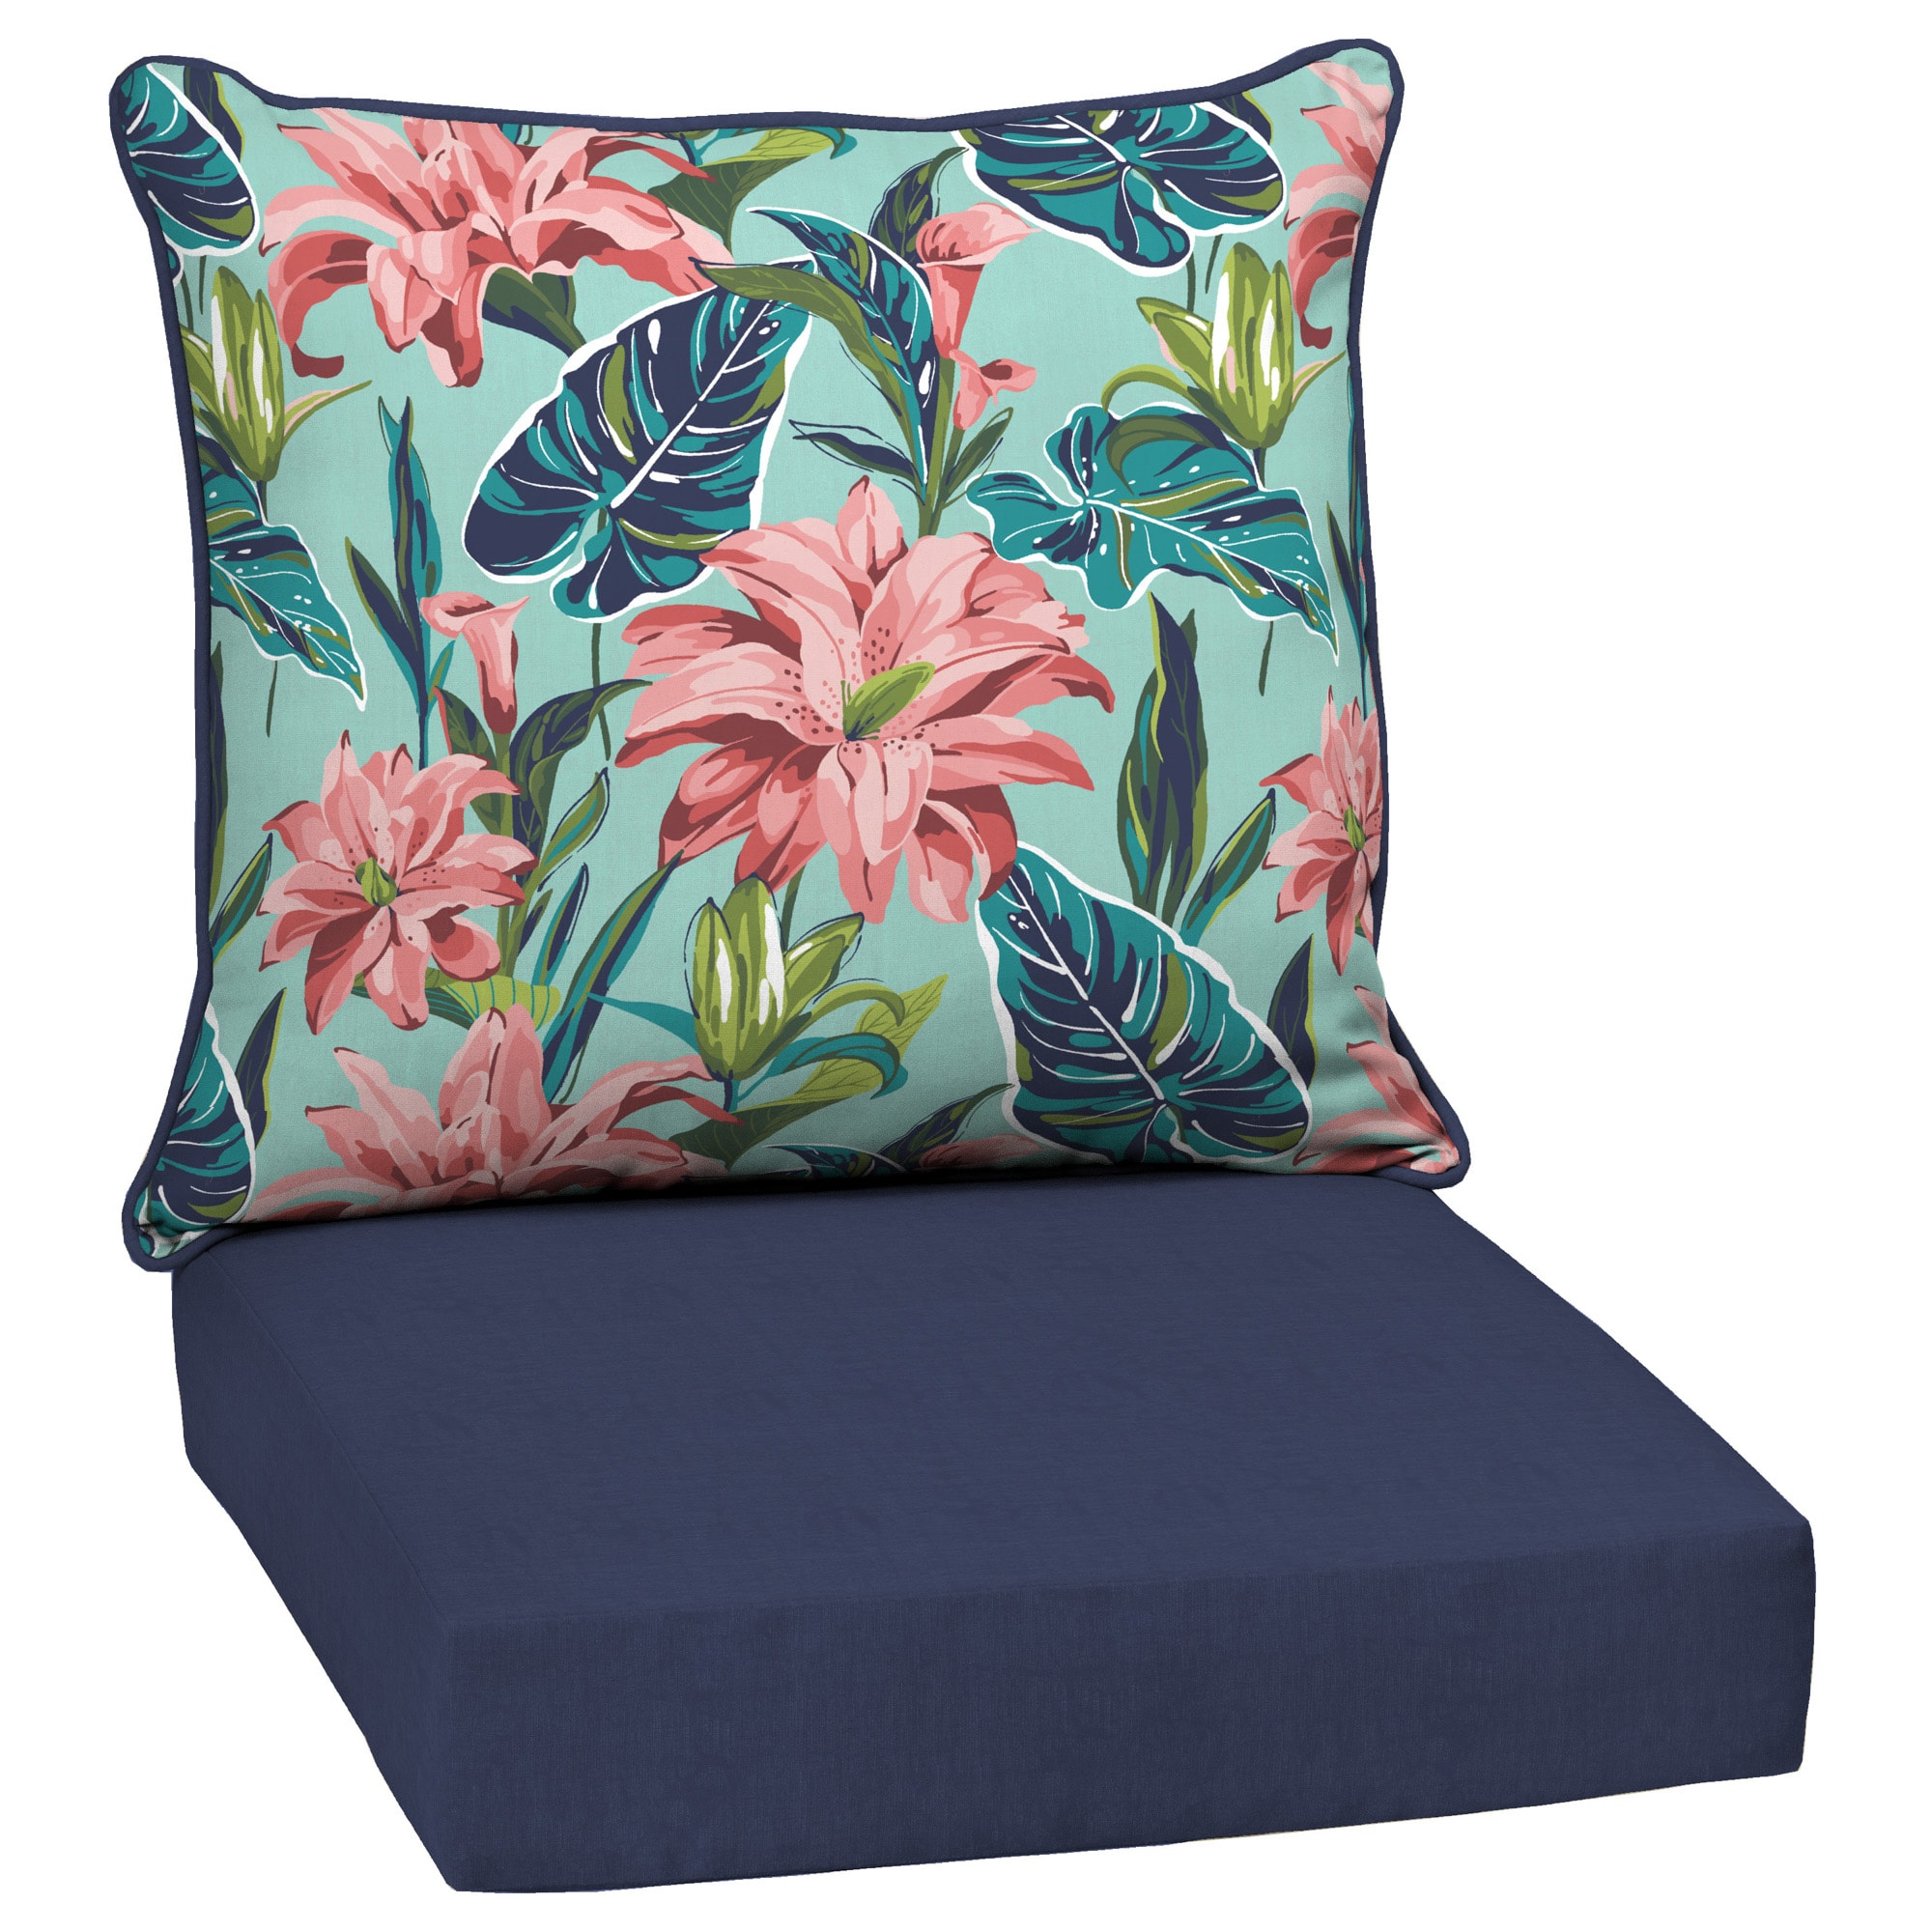 24-in Furniture Hana Blue Tropical the Cushions Patio Seat department x Chair at in Selections Cushion Deep Patio 24-in Style